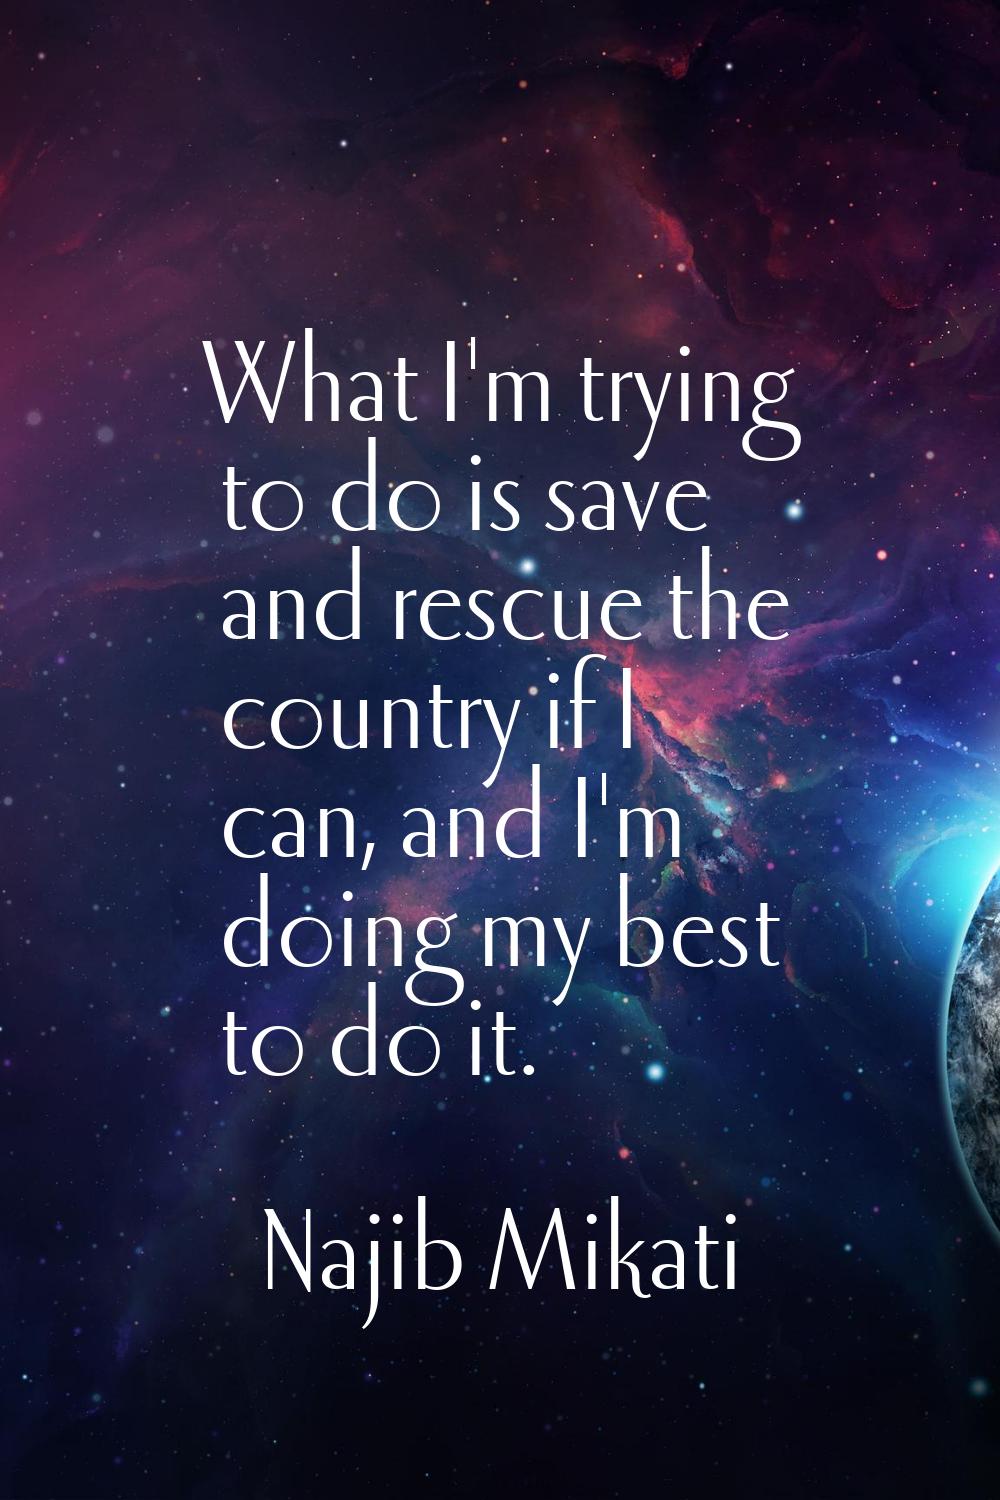 What I'm trying to do is save and rescue the country if I can, and I'm doing my best to do it.